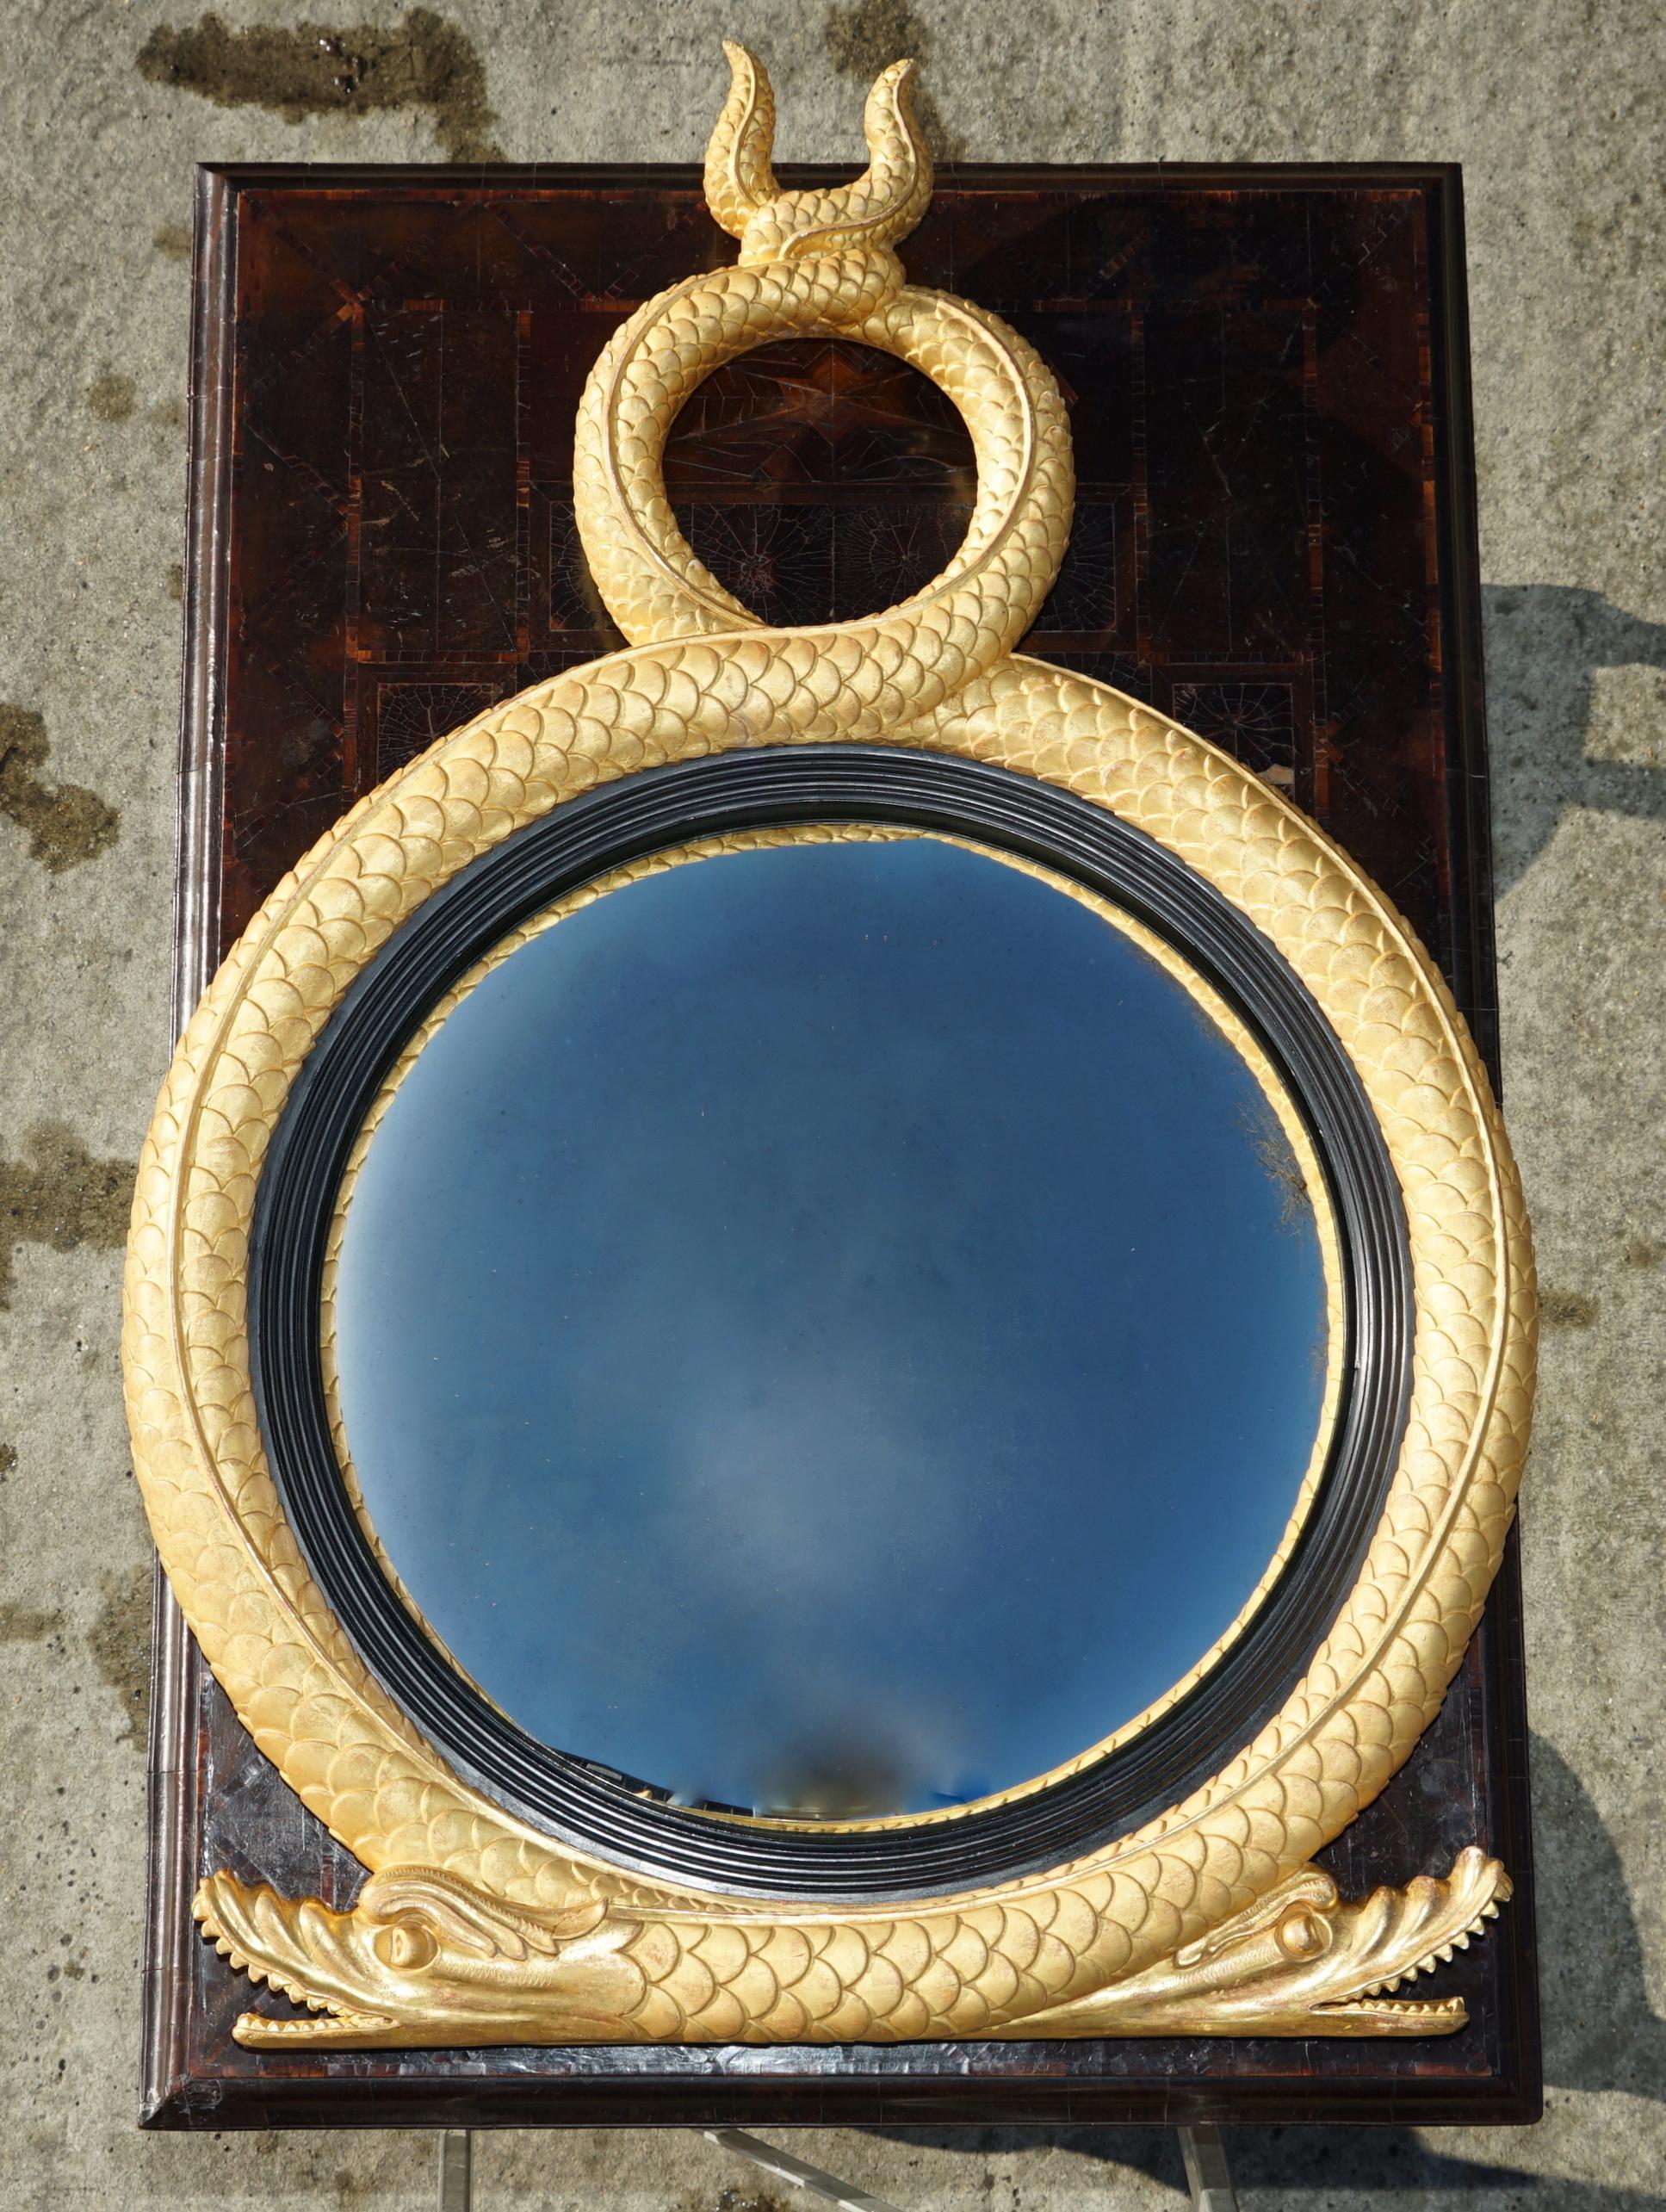 PAIR OF EXTRA LARGE STUNNING REGENCY  Style GOLD GILT TWIN SERPENT CONVEX MiRRORS im Angebot 2